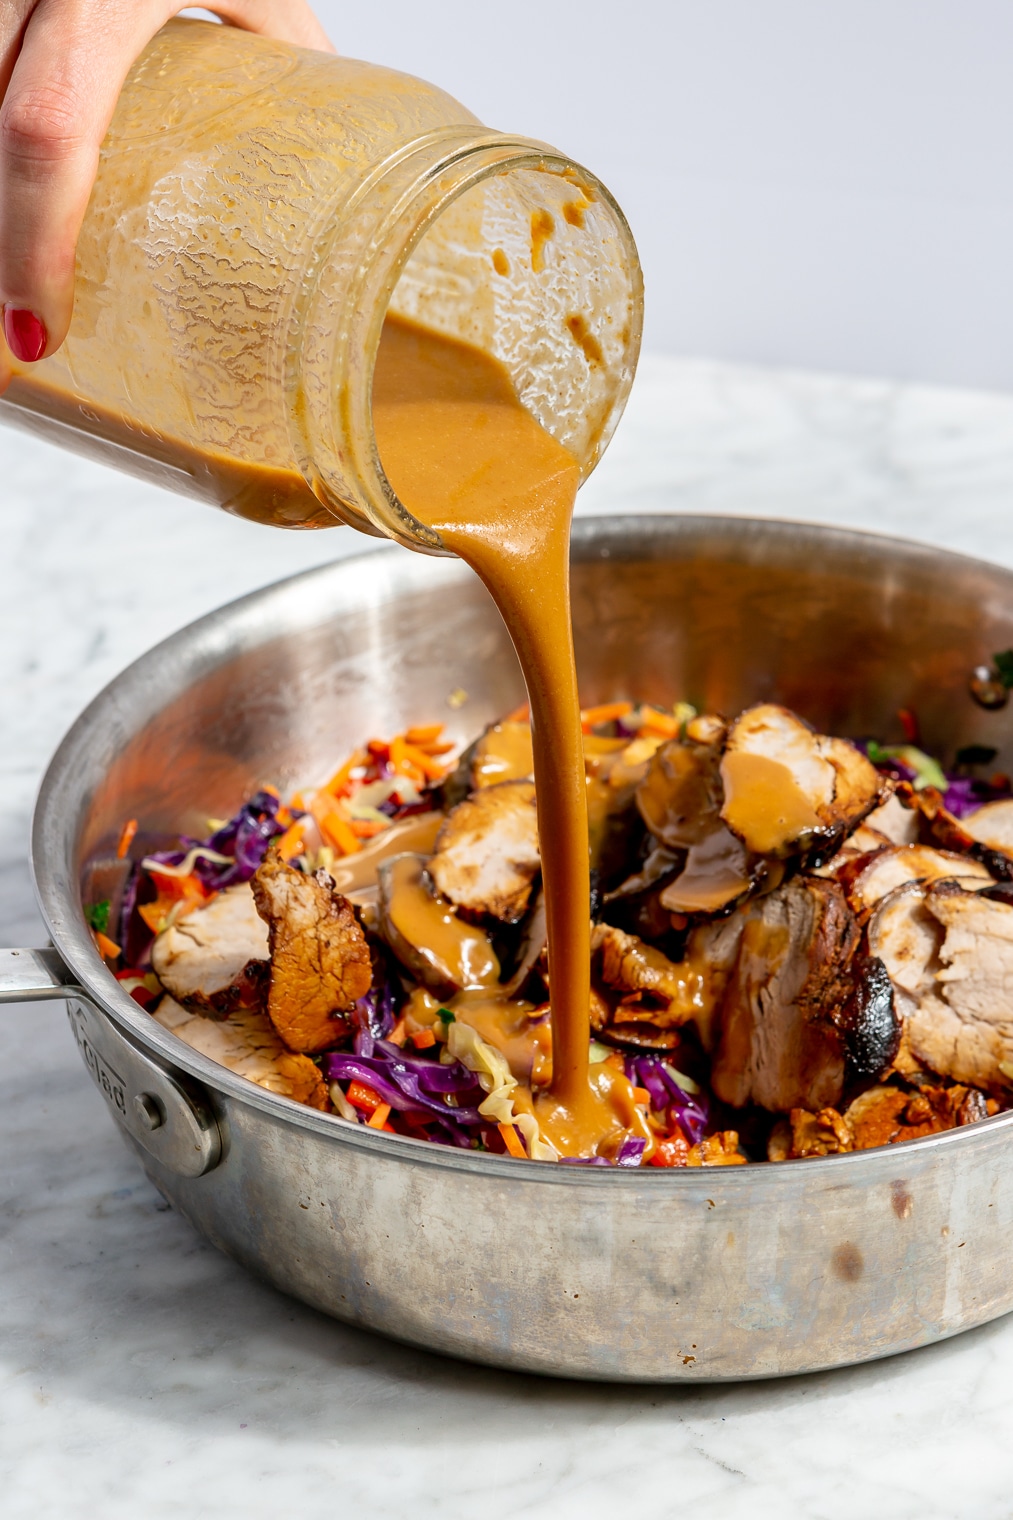 A person pouring peanut teriyaki sauce over a pork and veggie stir fry in a pan.